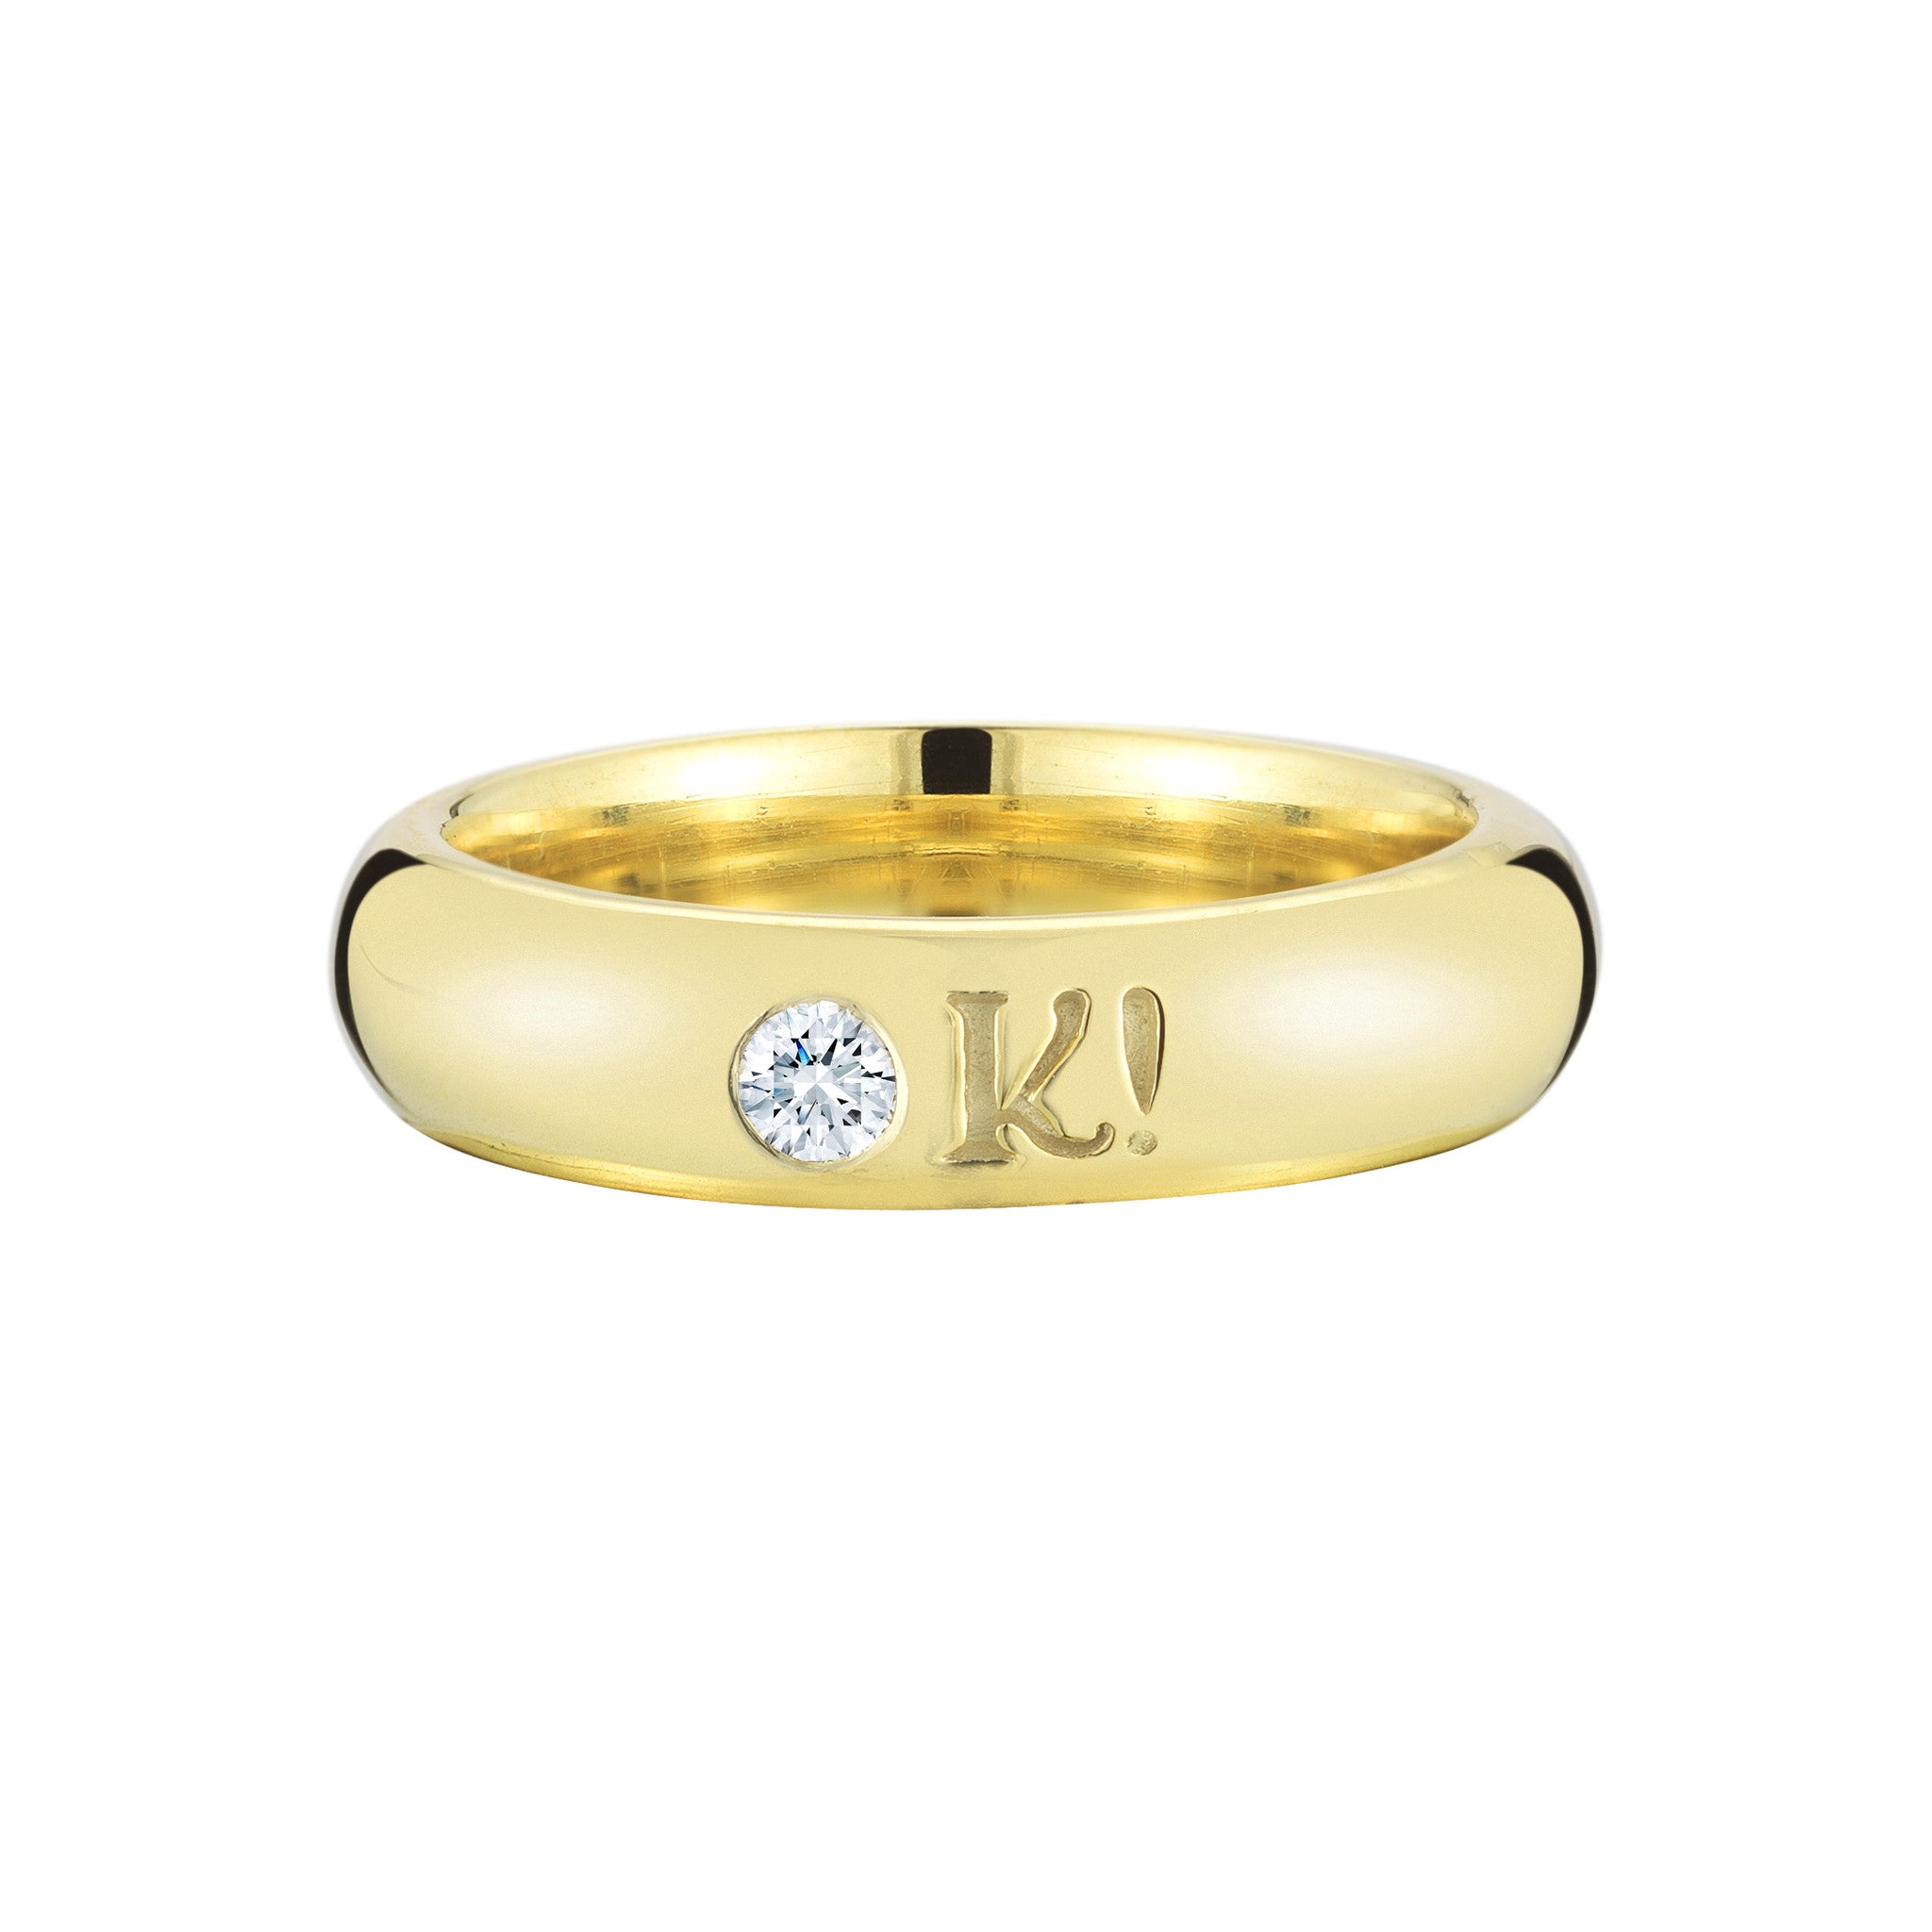 Amazon.com: XIN HUA 4 pack Celestial Sun and Moon Ring Set, Sun Ring/Blue  Moon Ring with 14k Gold/Silver Plating,Stackable Rings Promise Friendship  Rings for Women Men: Clothing, Shoes & Jewelry